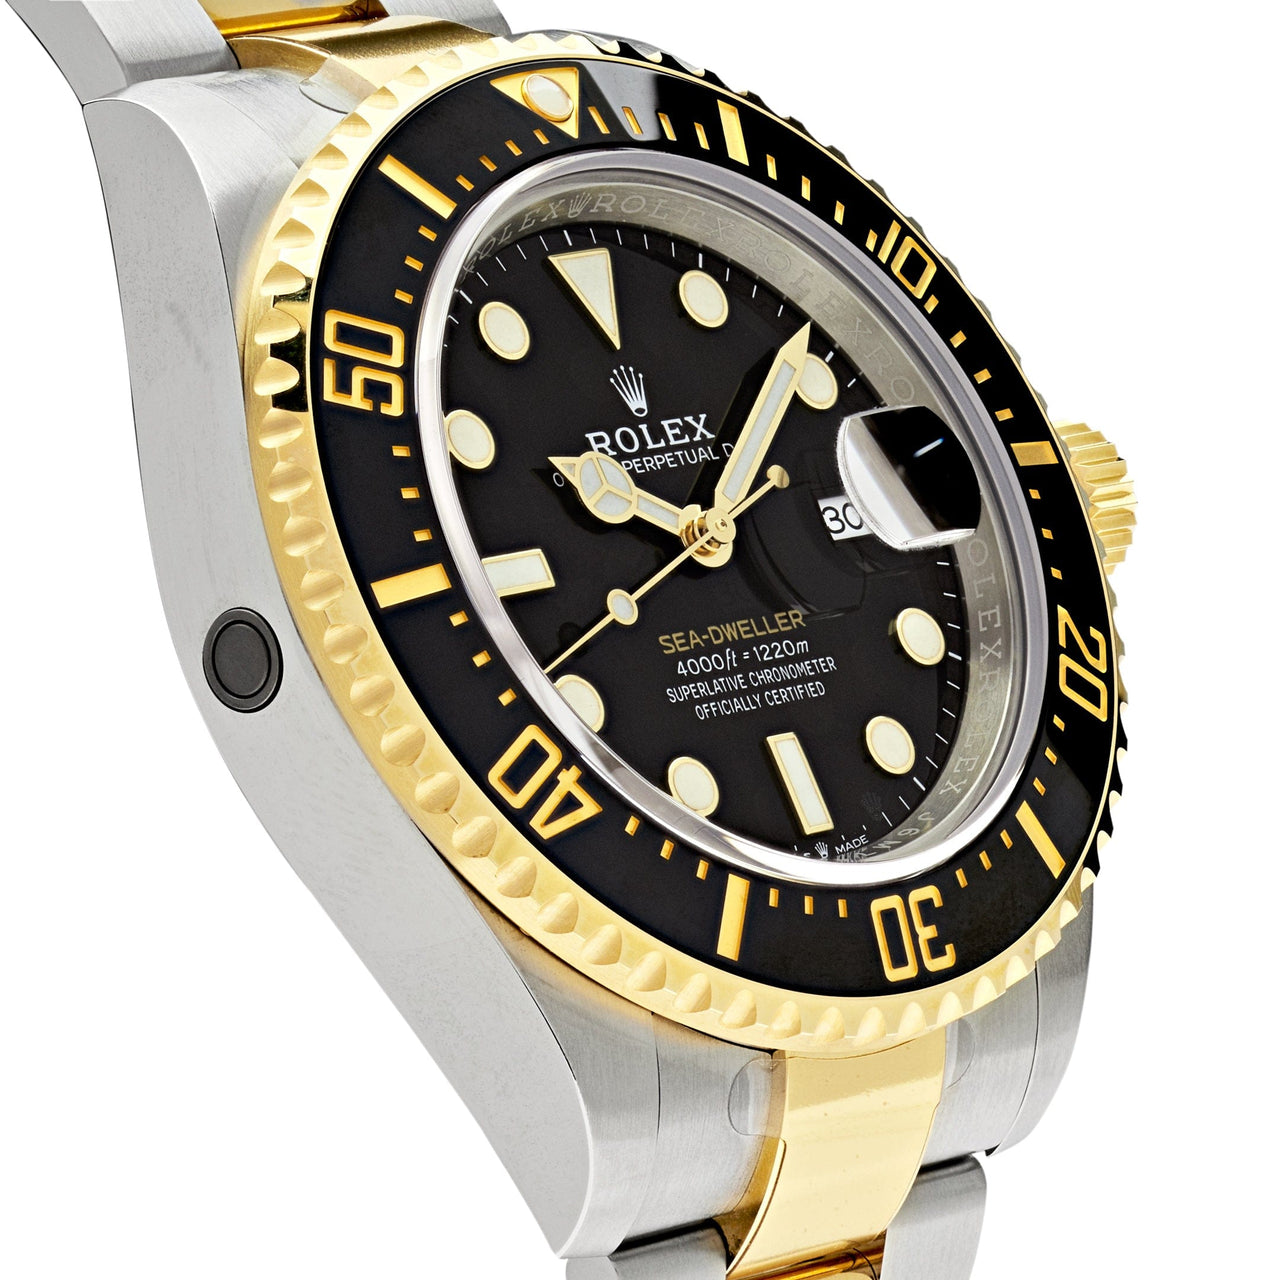 Rolex Sea-Dweller 126603 Stainless Steel Yellow Gold Black Dial 